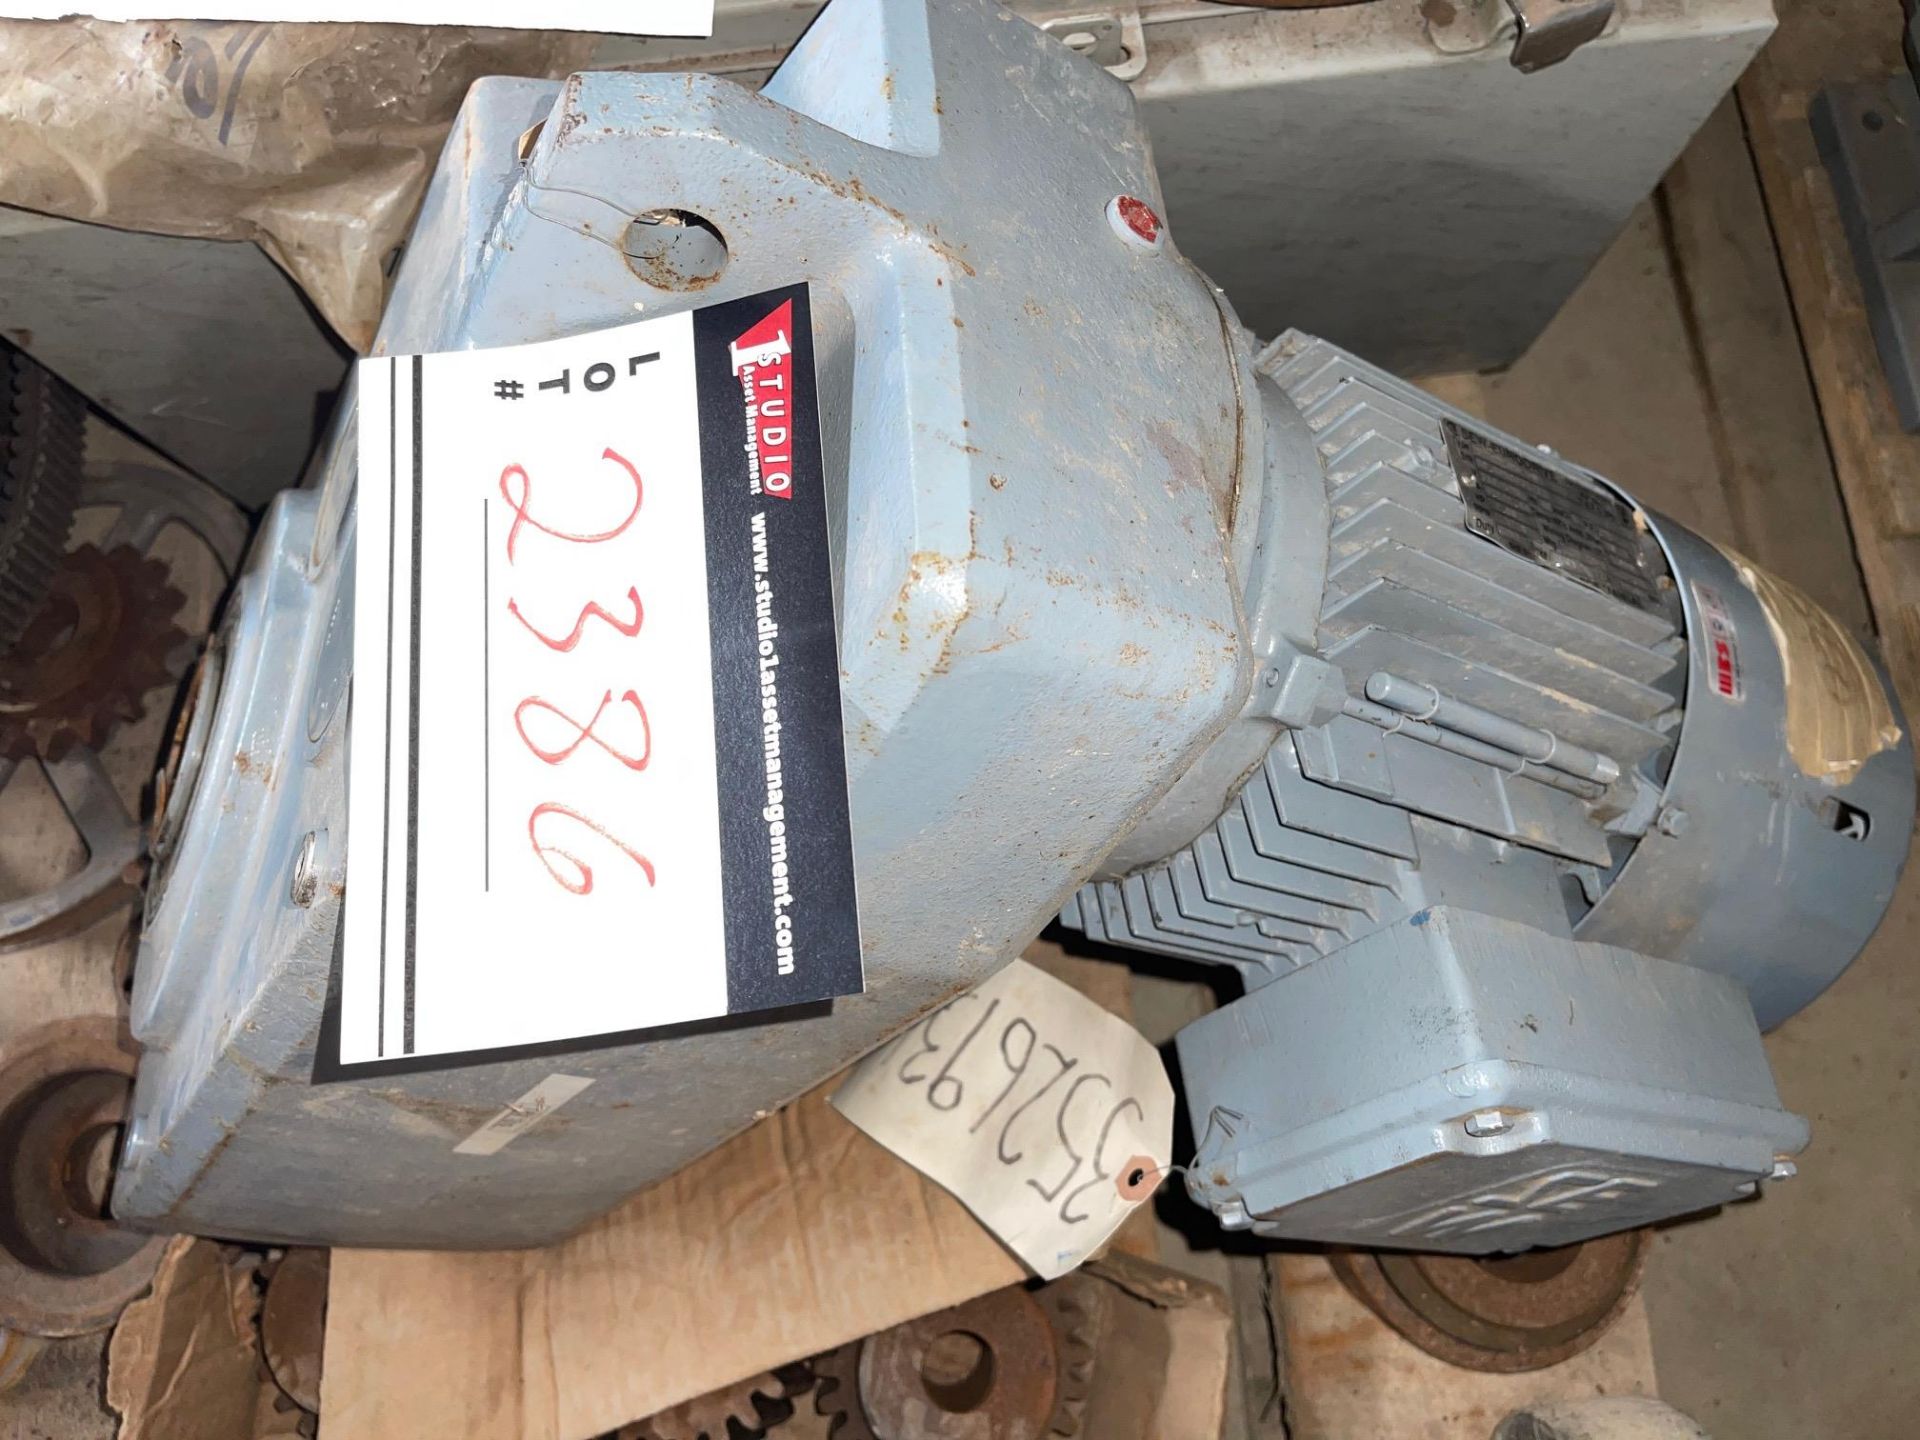 SEW MOTOR GEARBOX, 2 HP, 330/575, 1780 RPM WITH BRAKE, RATIO 143/1, 2” HOLLOW SHAFT, TYPE-DFT90L4BM2 - Image 3 of 3